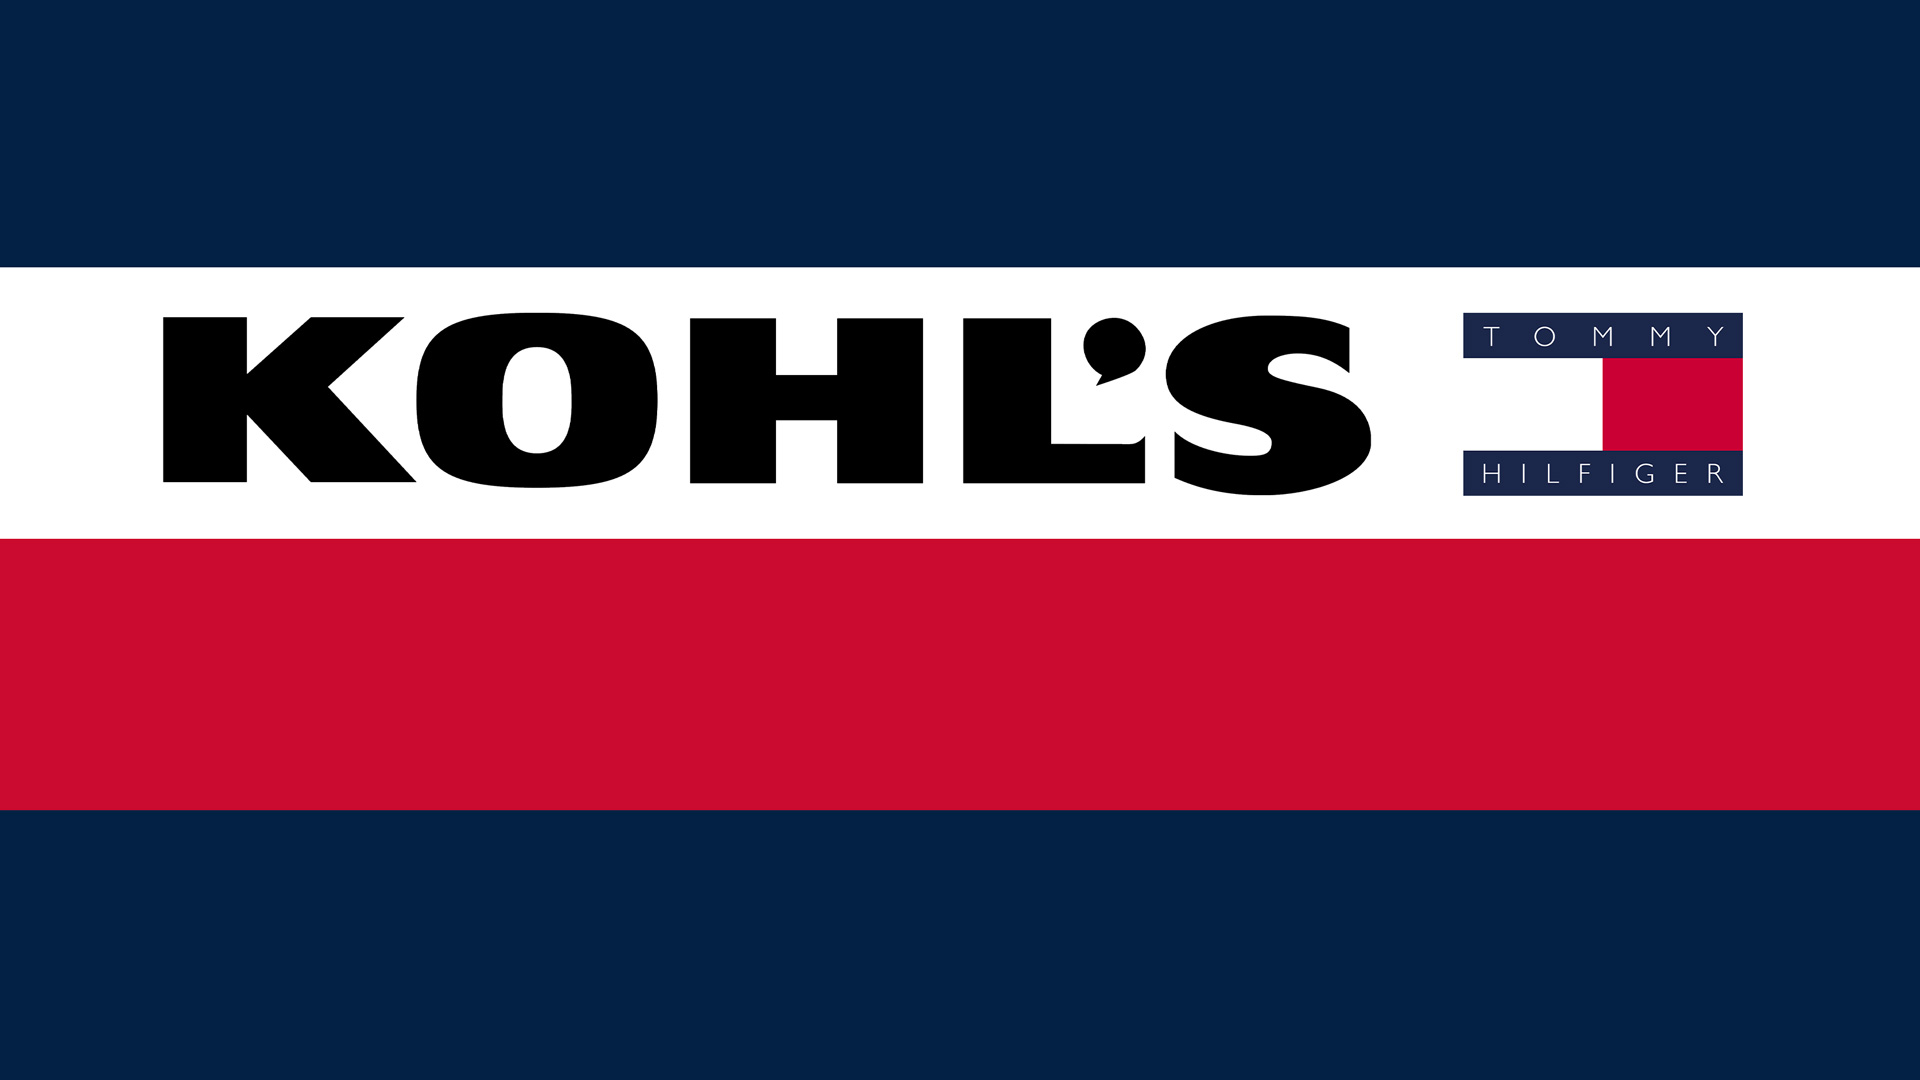 Kohl's inked a deal to carry Tommy Hilfiger's menswear line beginning this fall.